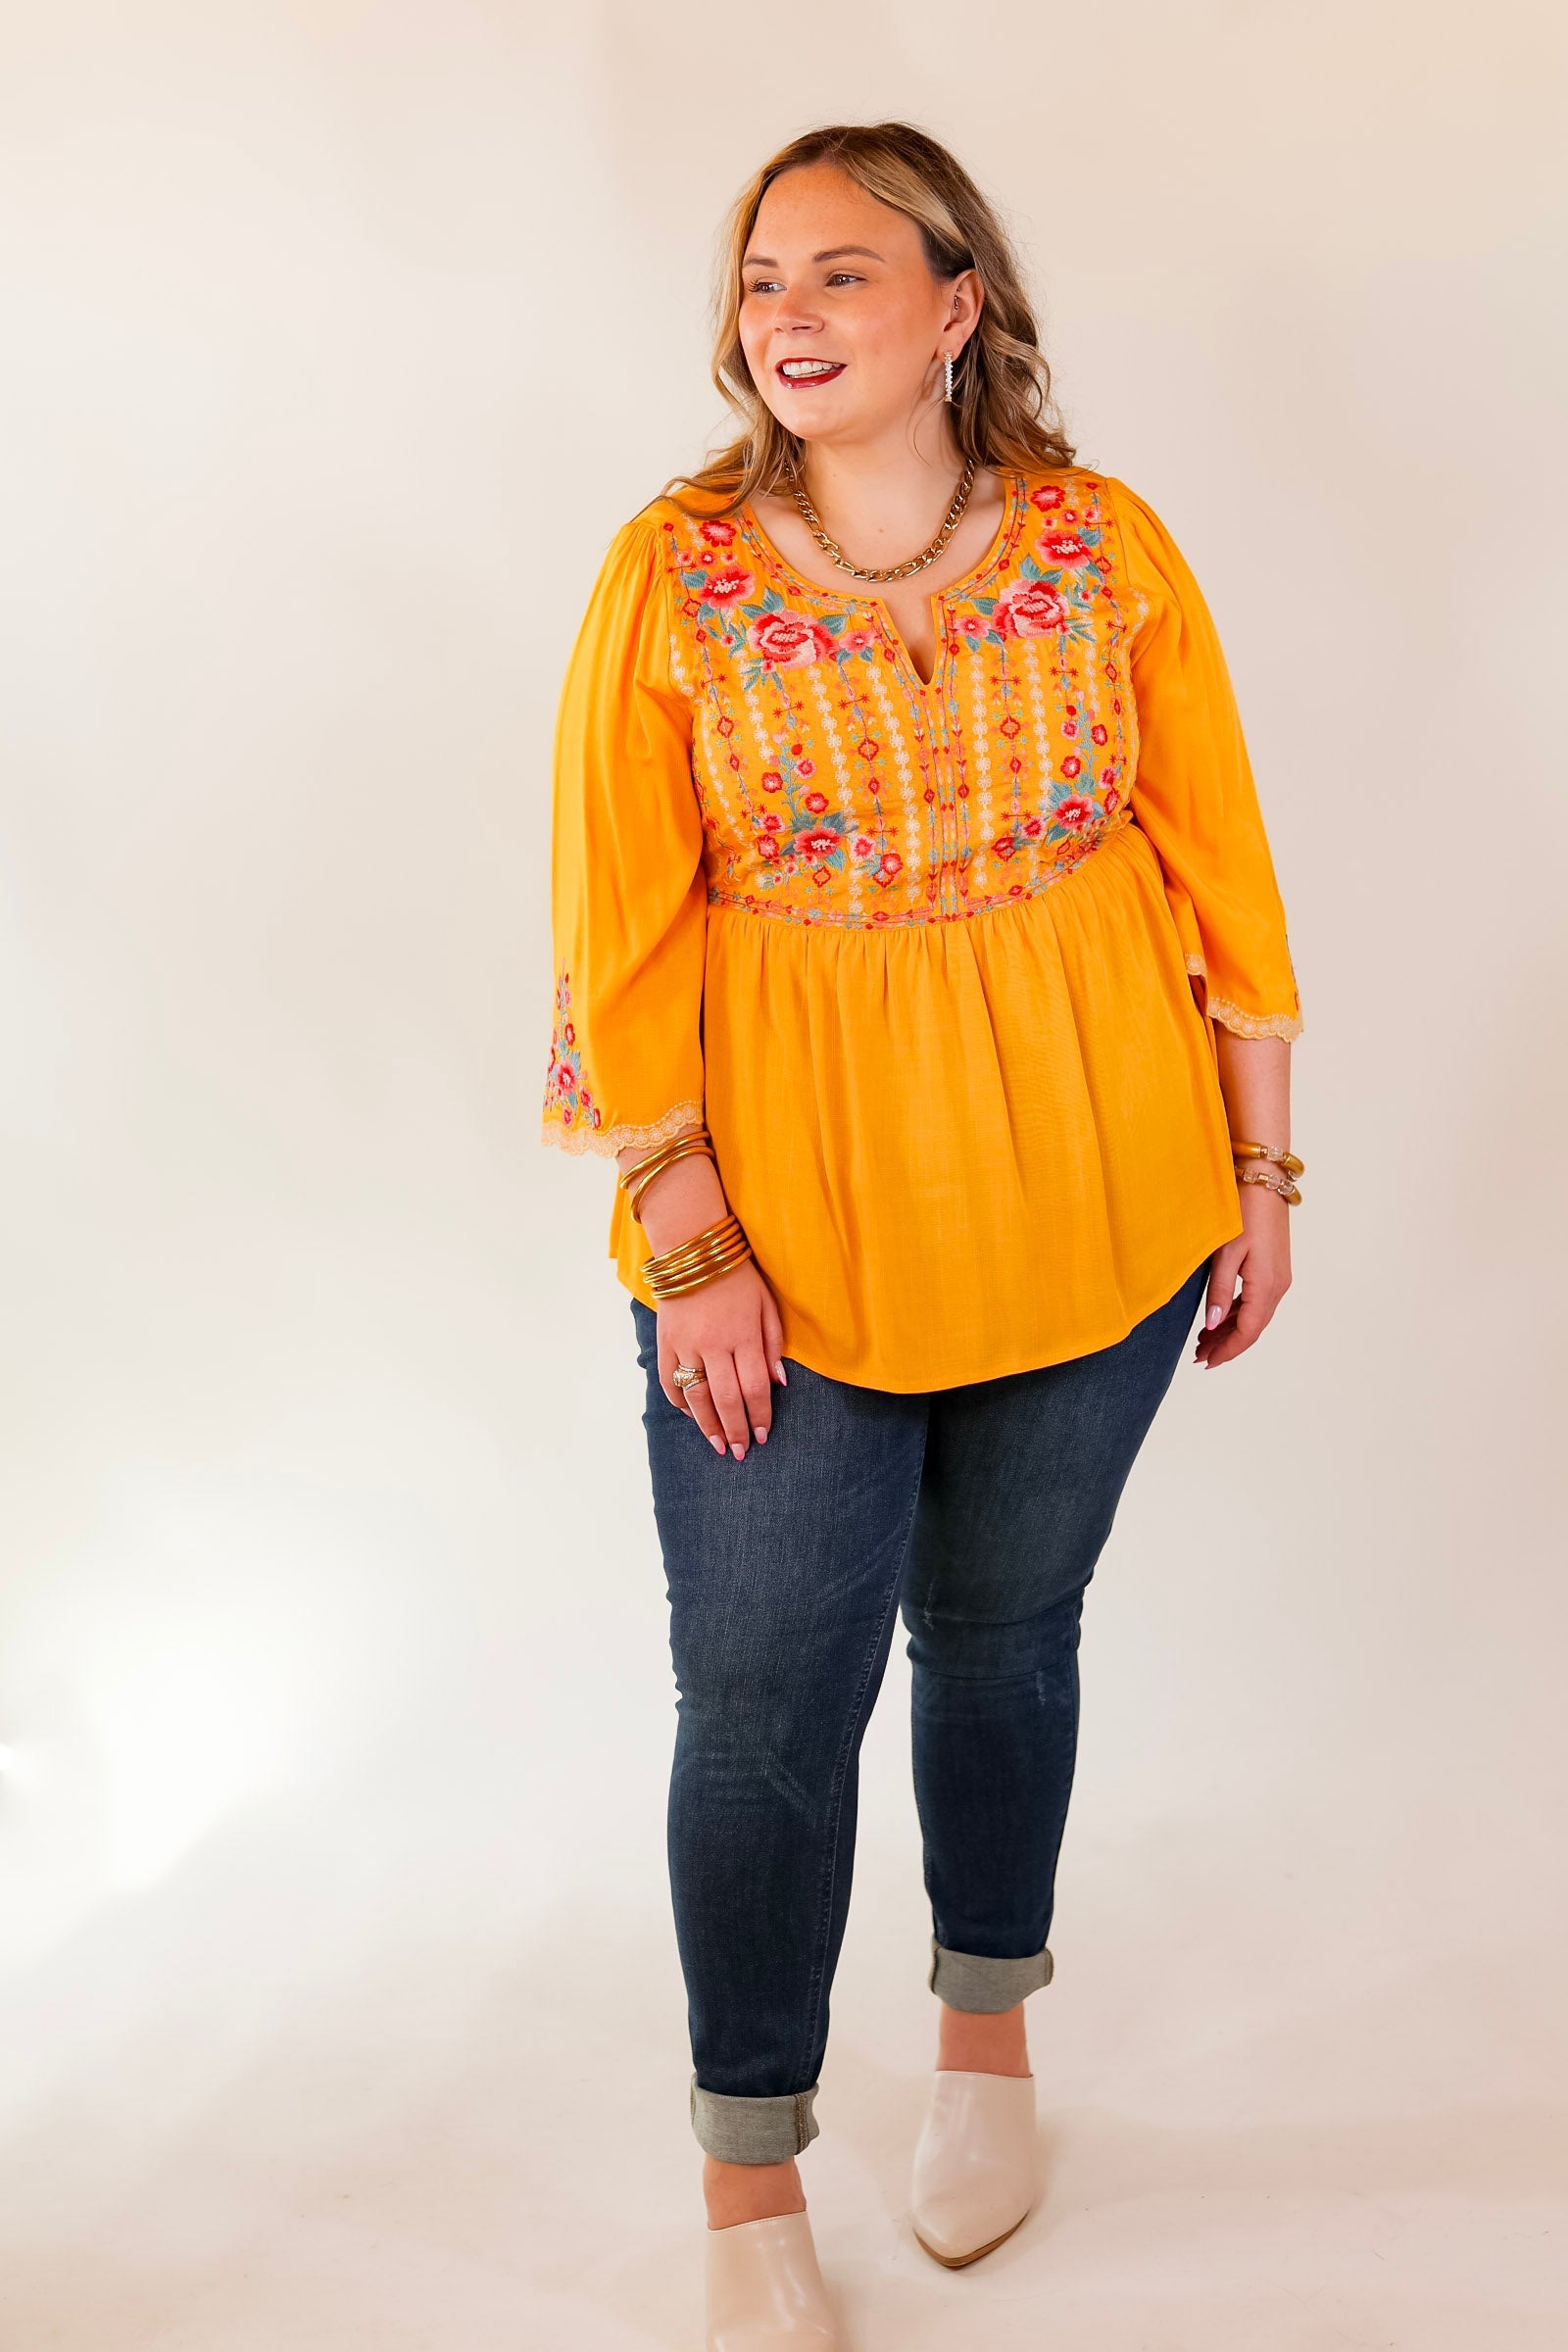 Already Mine 3/4 Bell Sleeve Embroidered Babydoll Top in Yellow - Giddy Up Glamour Boutique